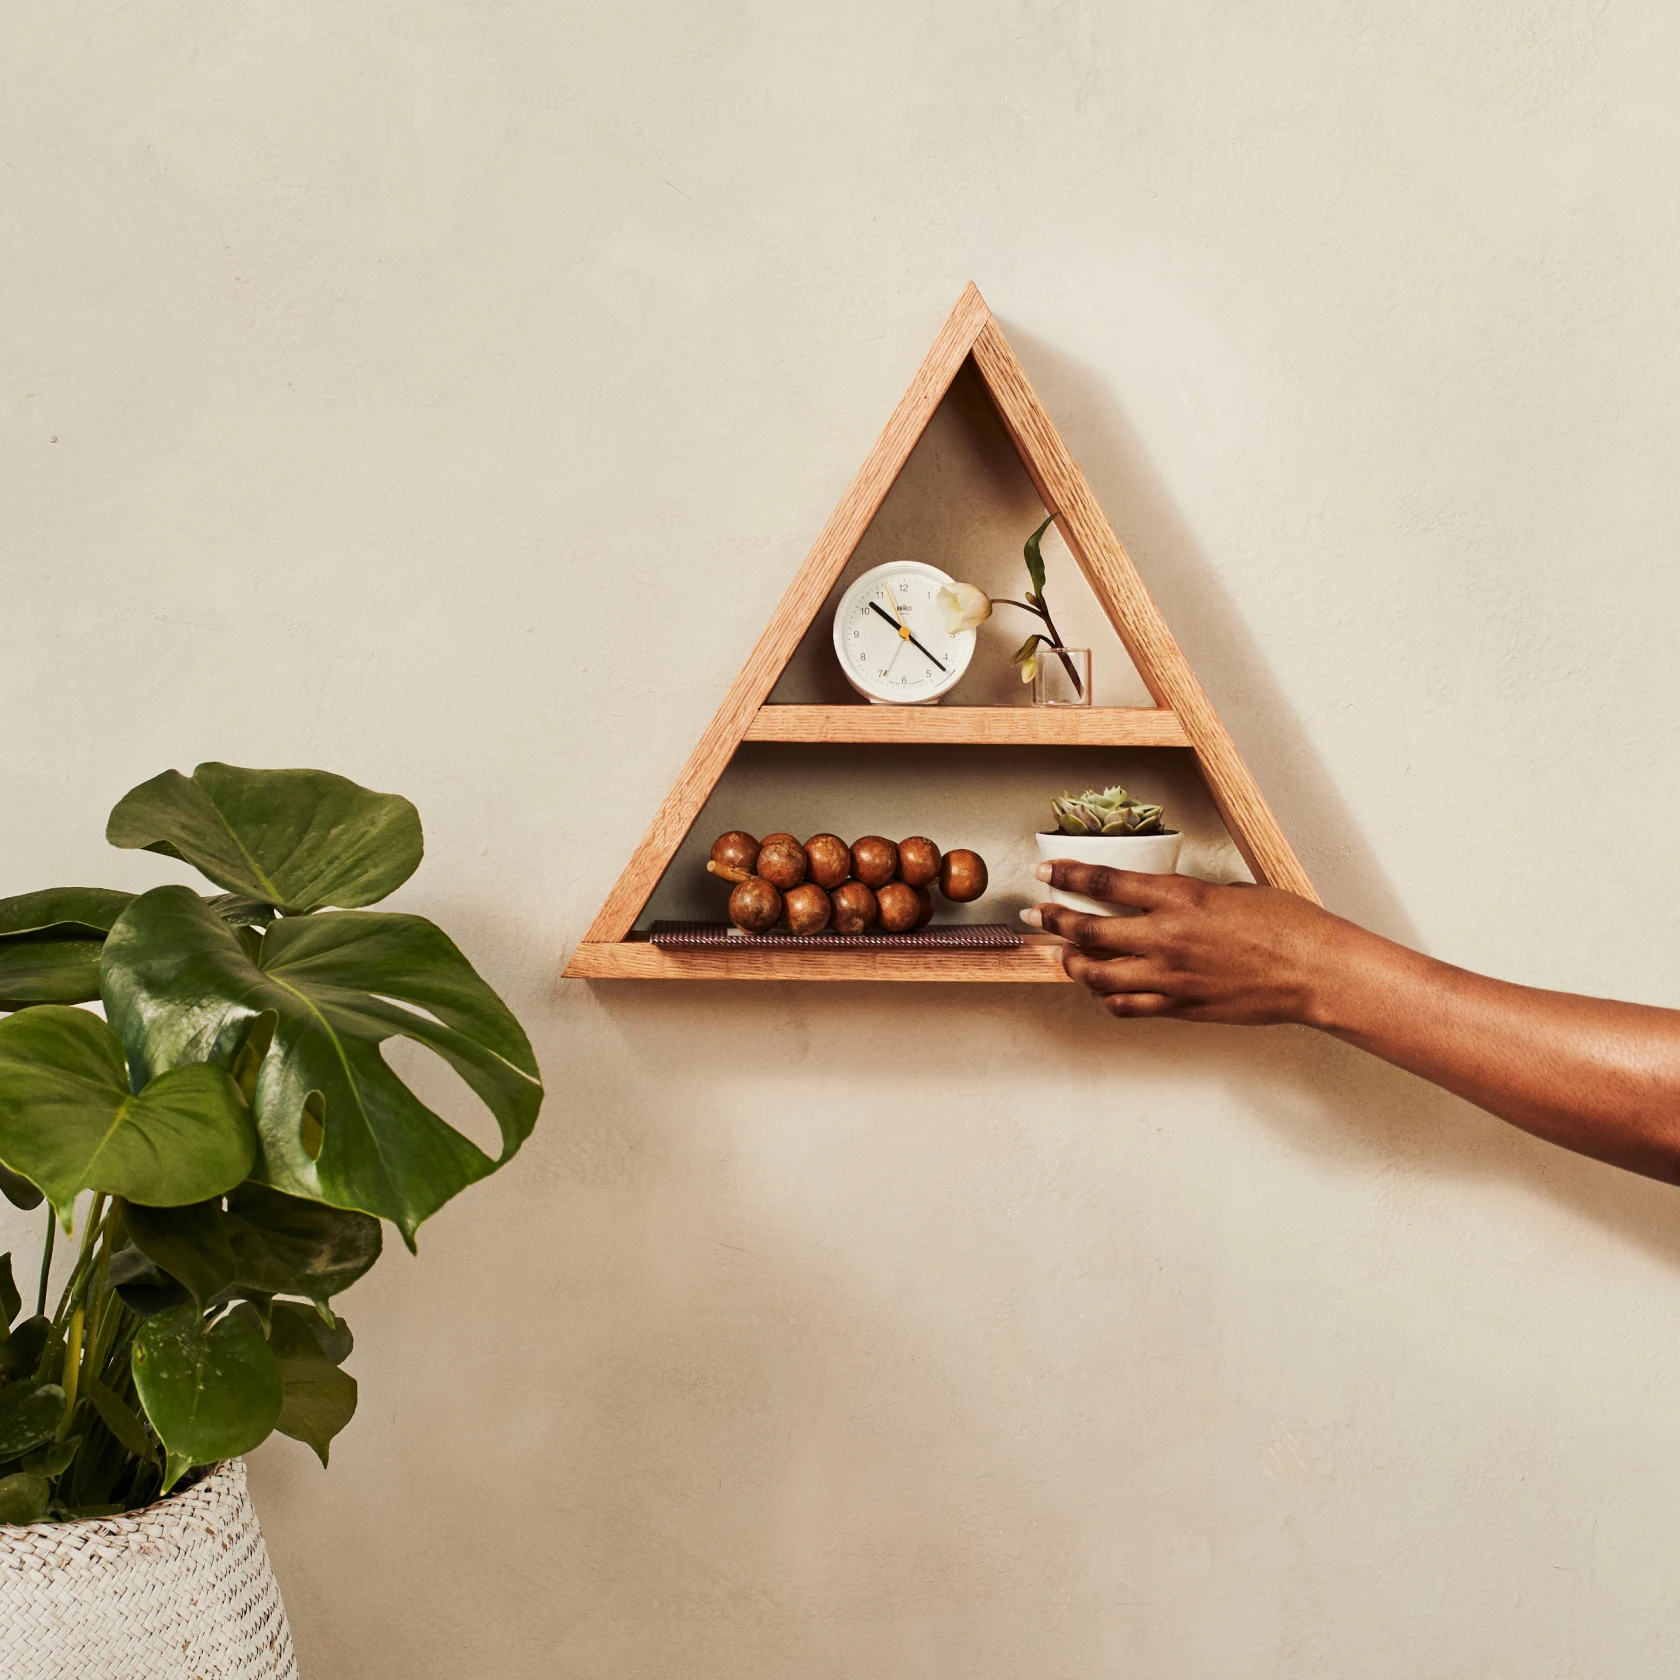 A person placing a small pot of succulents onto a floating wooden, triangle shelf hanging on a plain white wall. On the shelf is also a wooden clock, one white flower in a small glass and wooden sculpture of grapes. A large plant is on the floor next to the shelf.